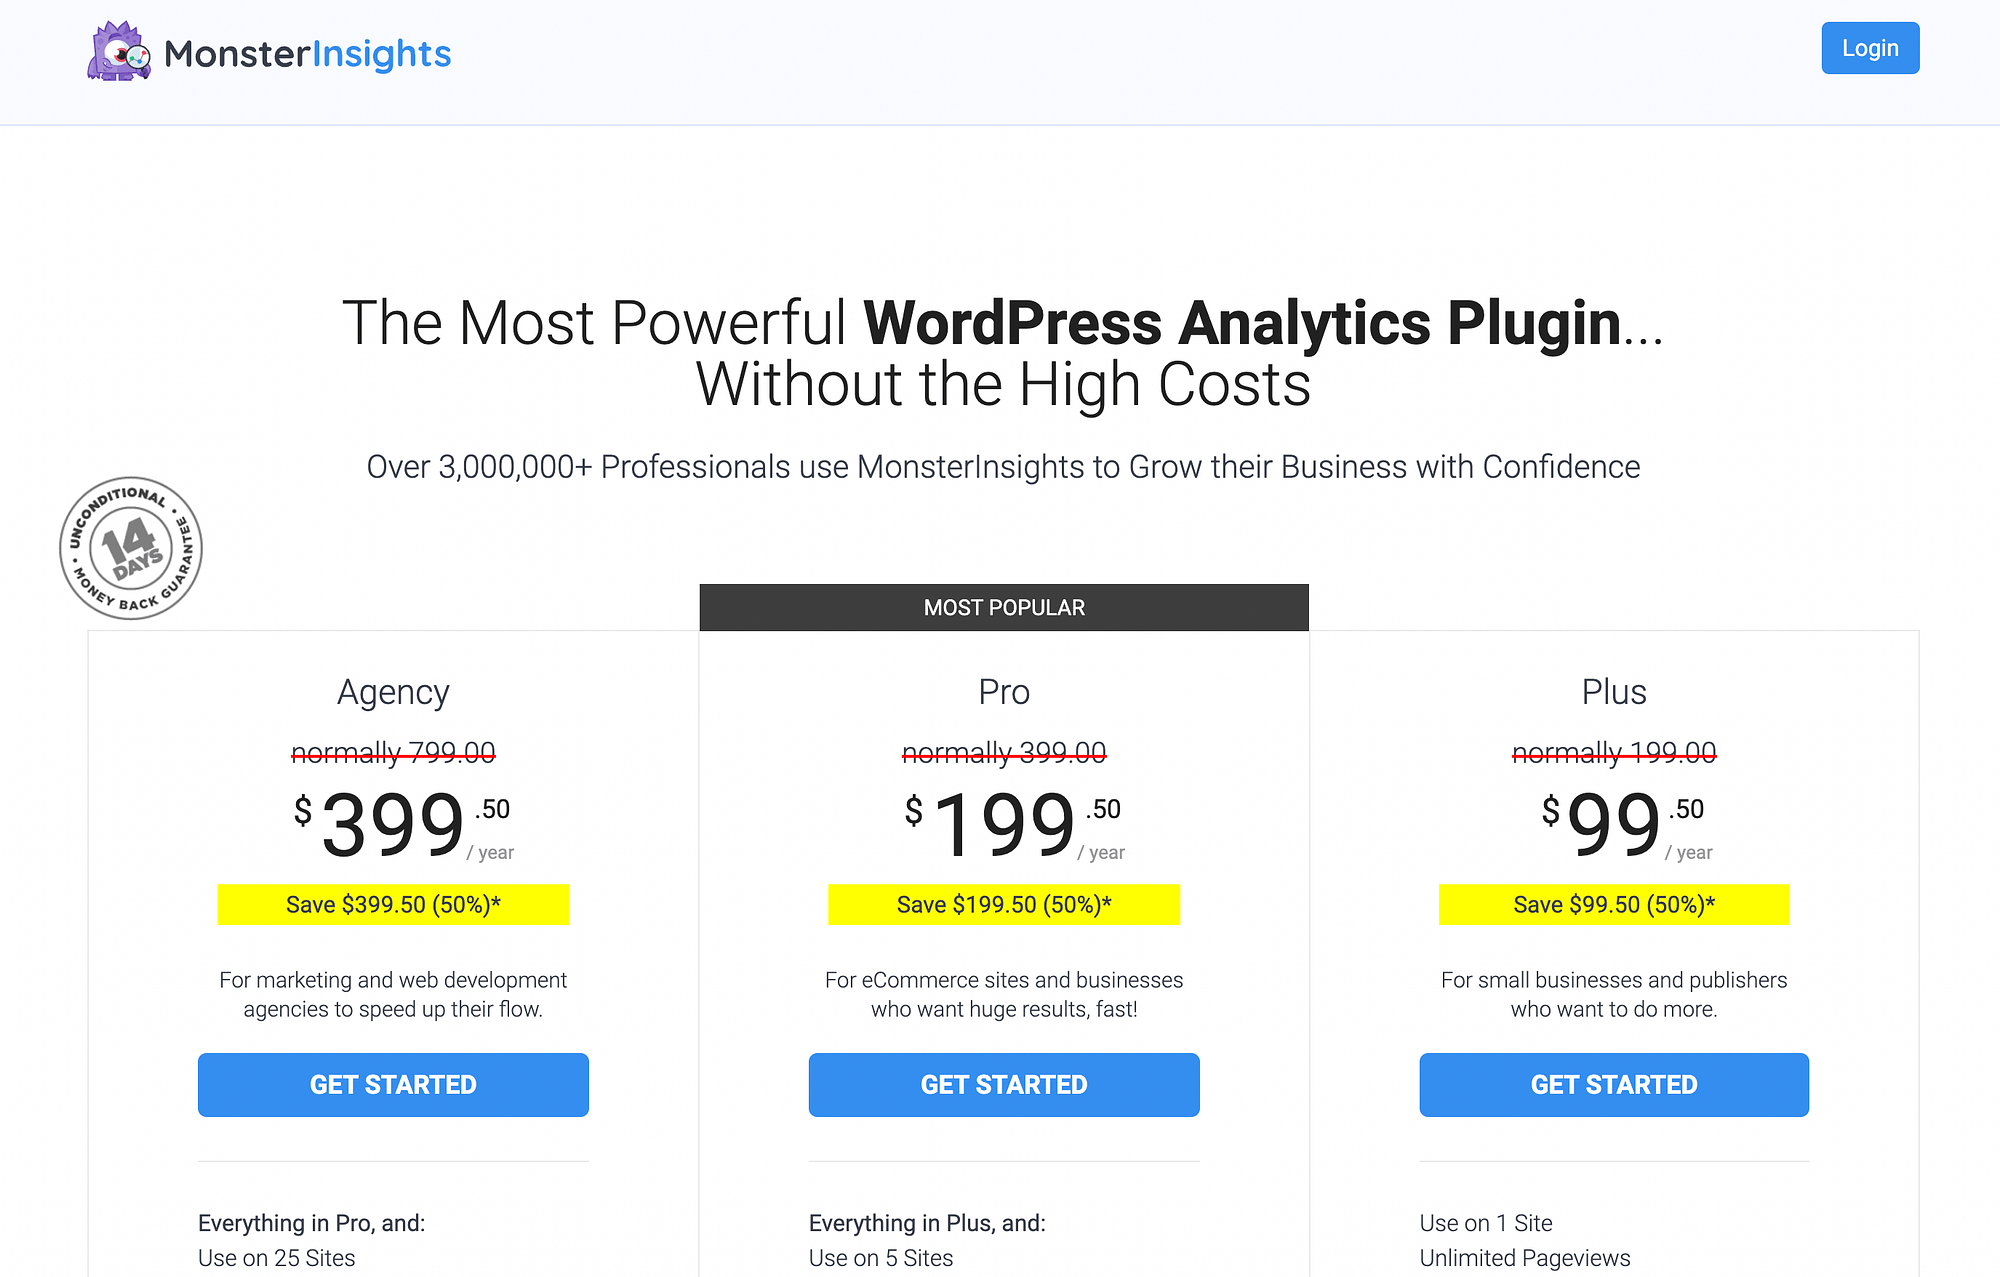 MonsterInsights pricing page.